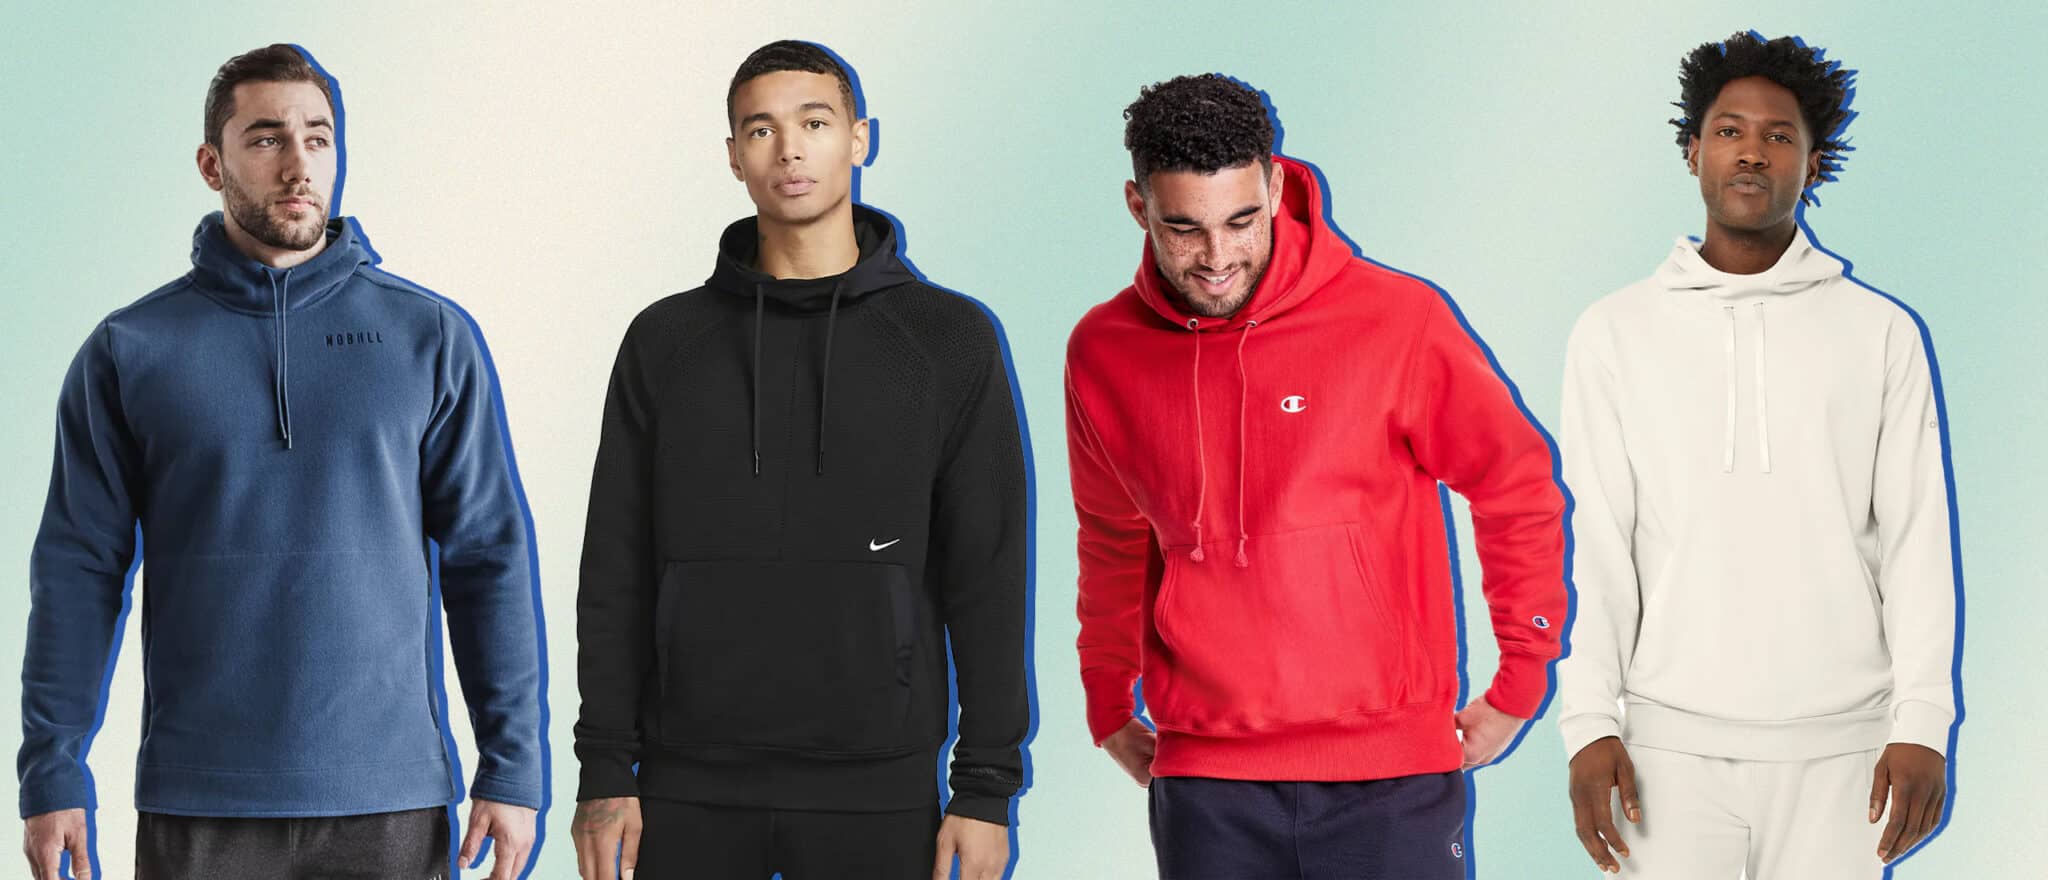 It’s Gym Hoodie Season. Here Are the Best You Can Buy